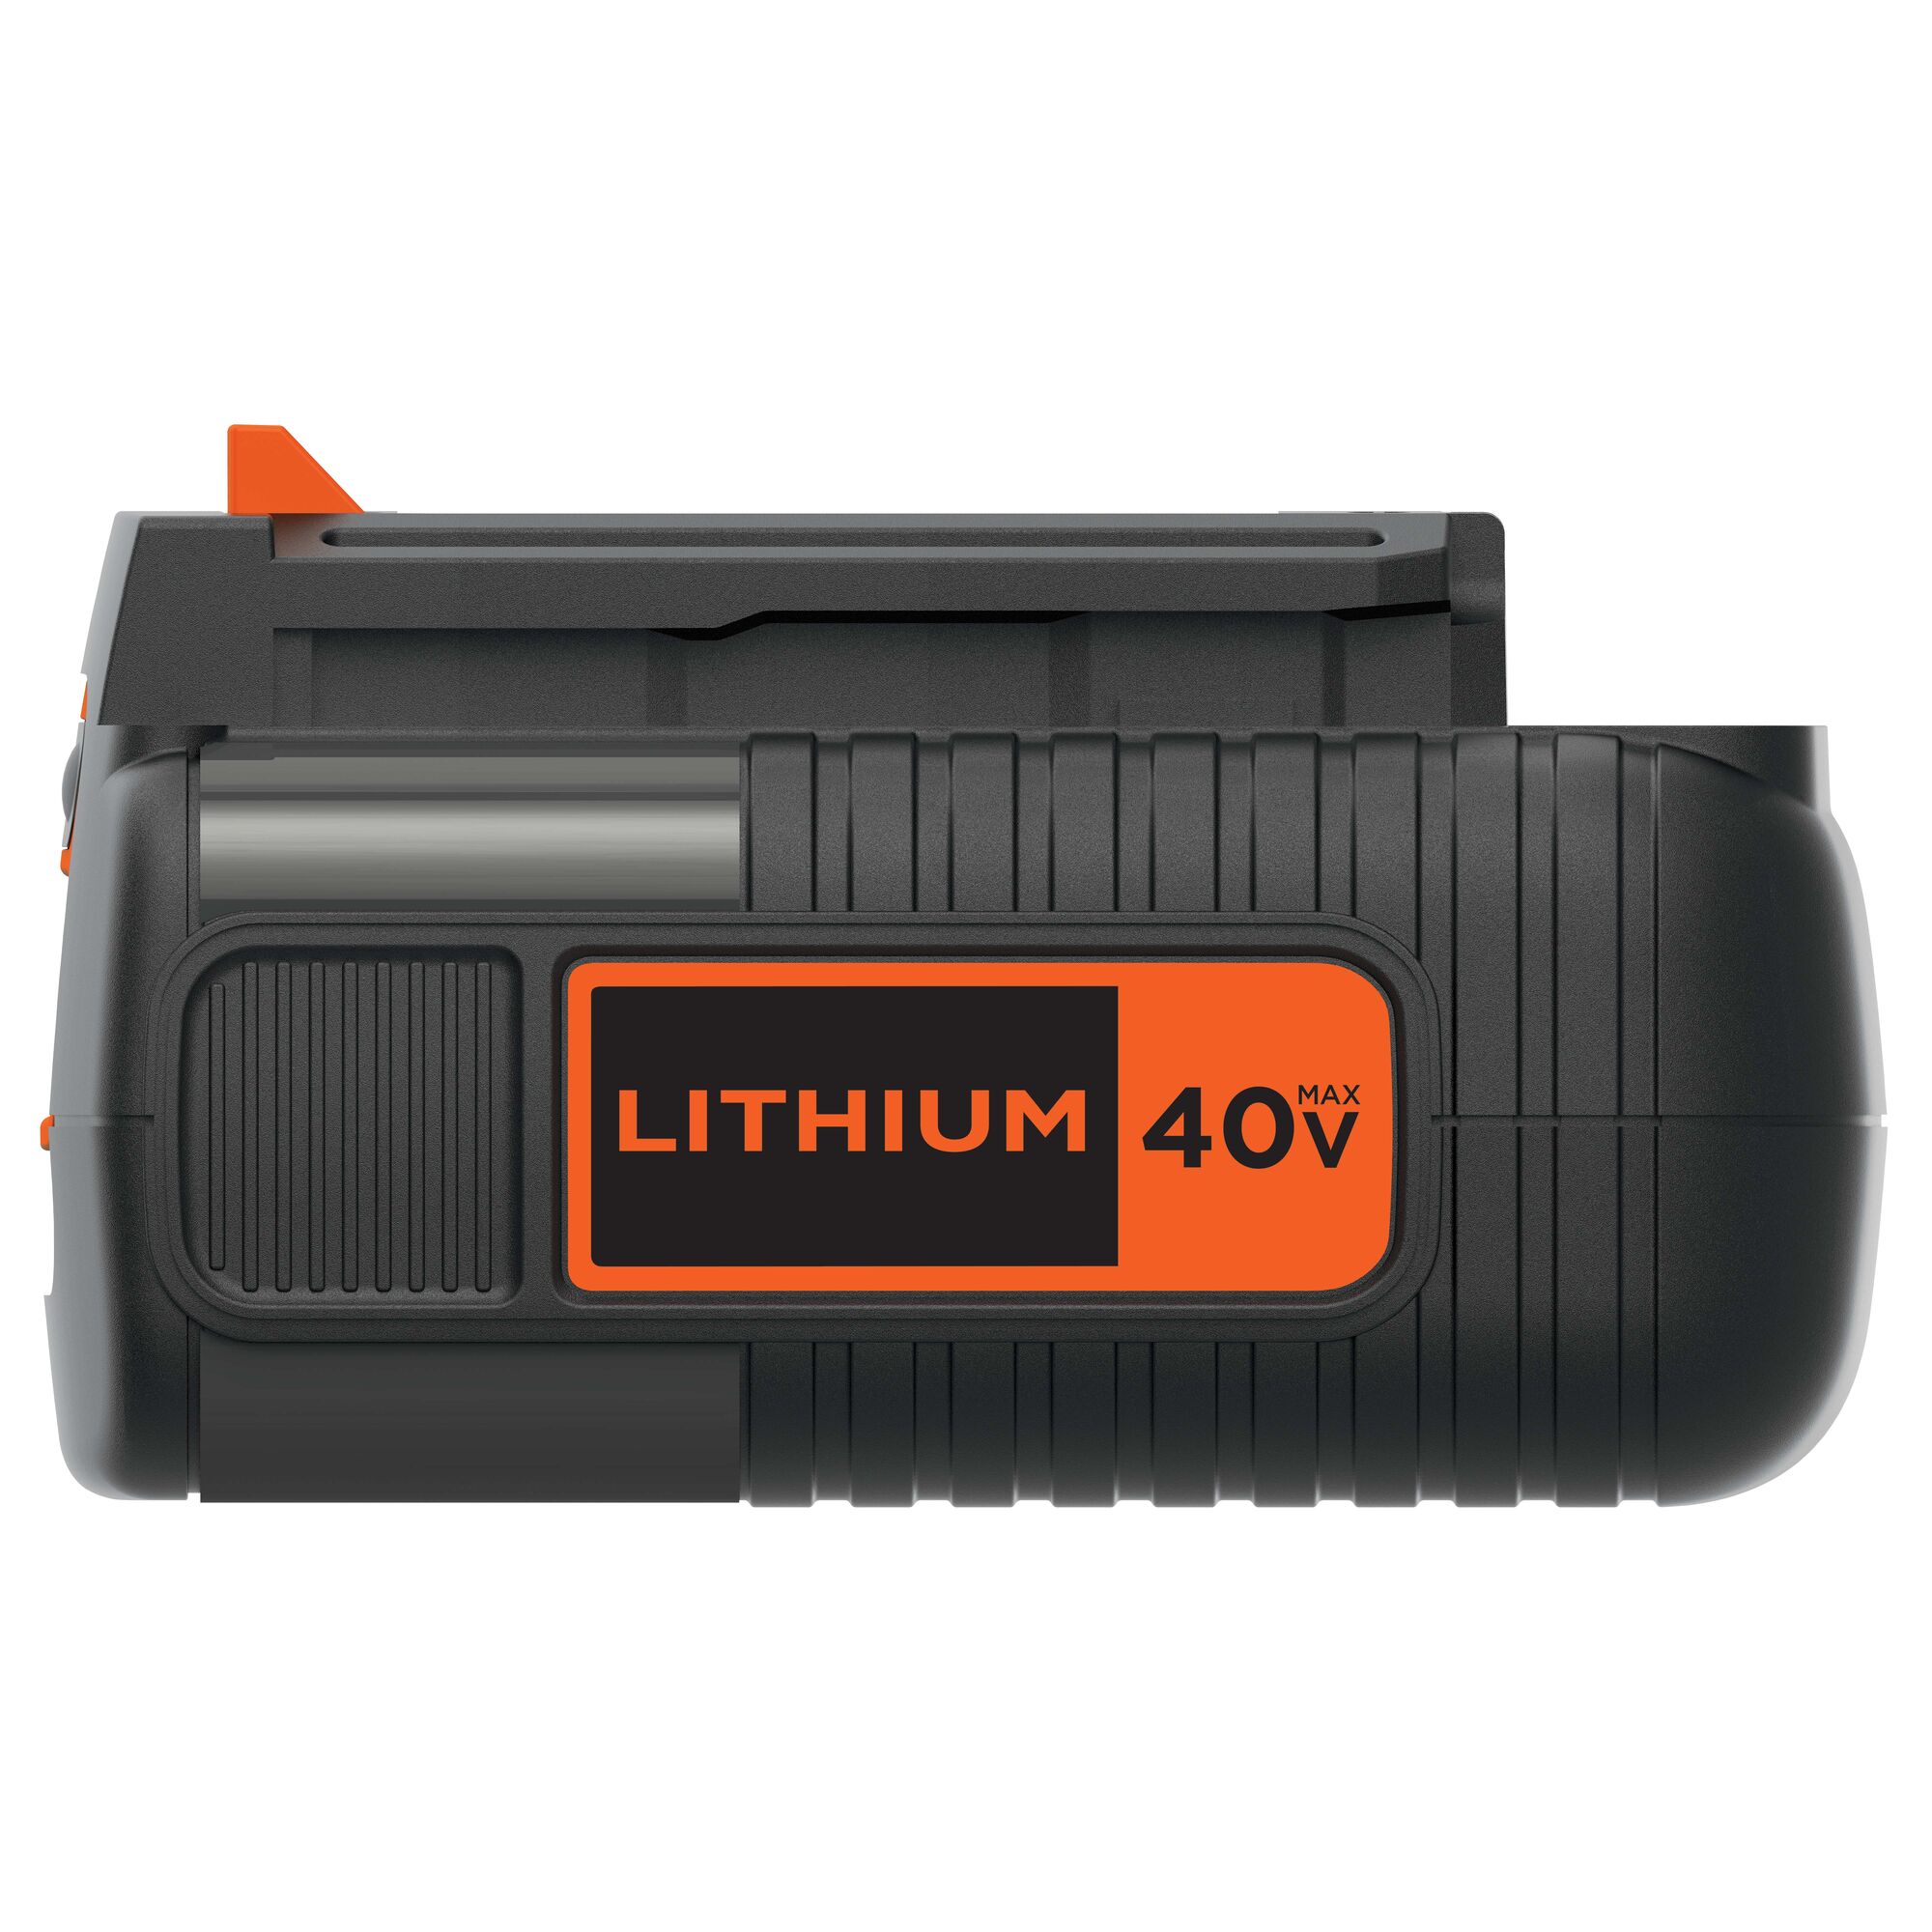 40 volts MAX 2.0 Amp hours Lithium ion battery.